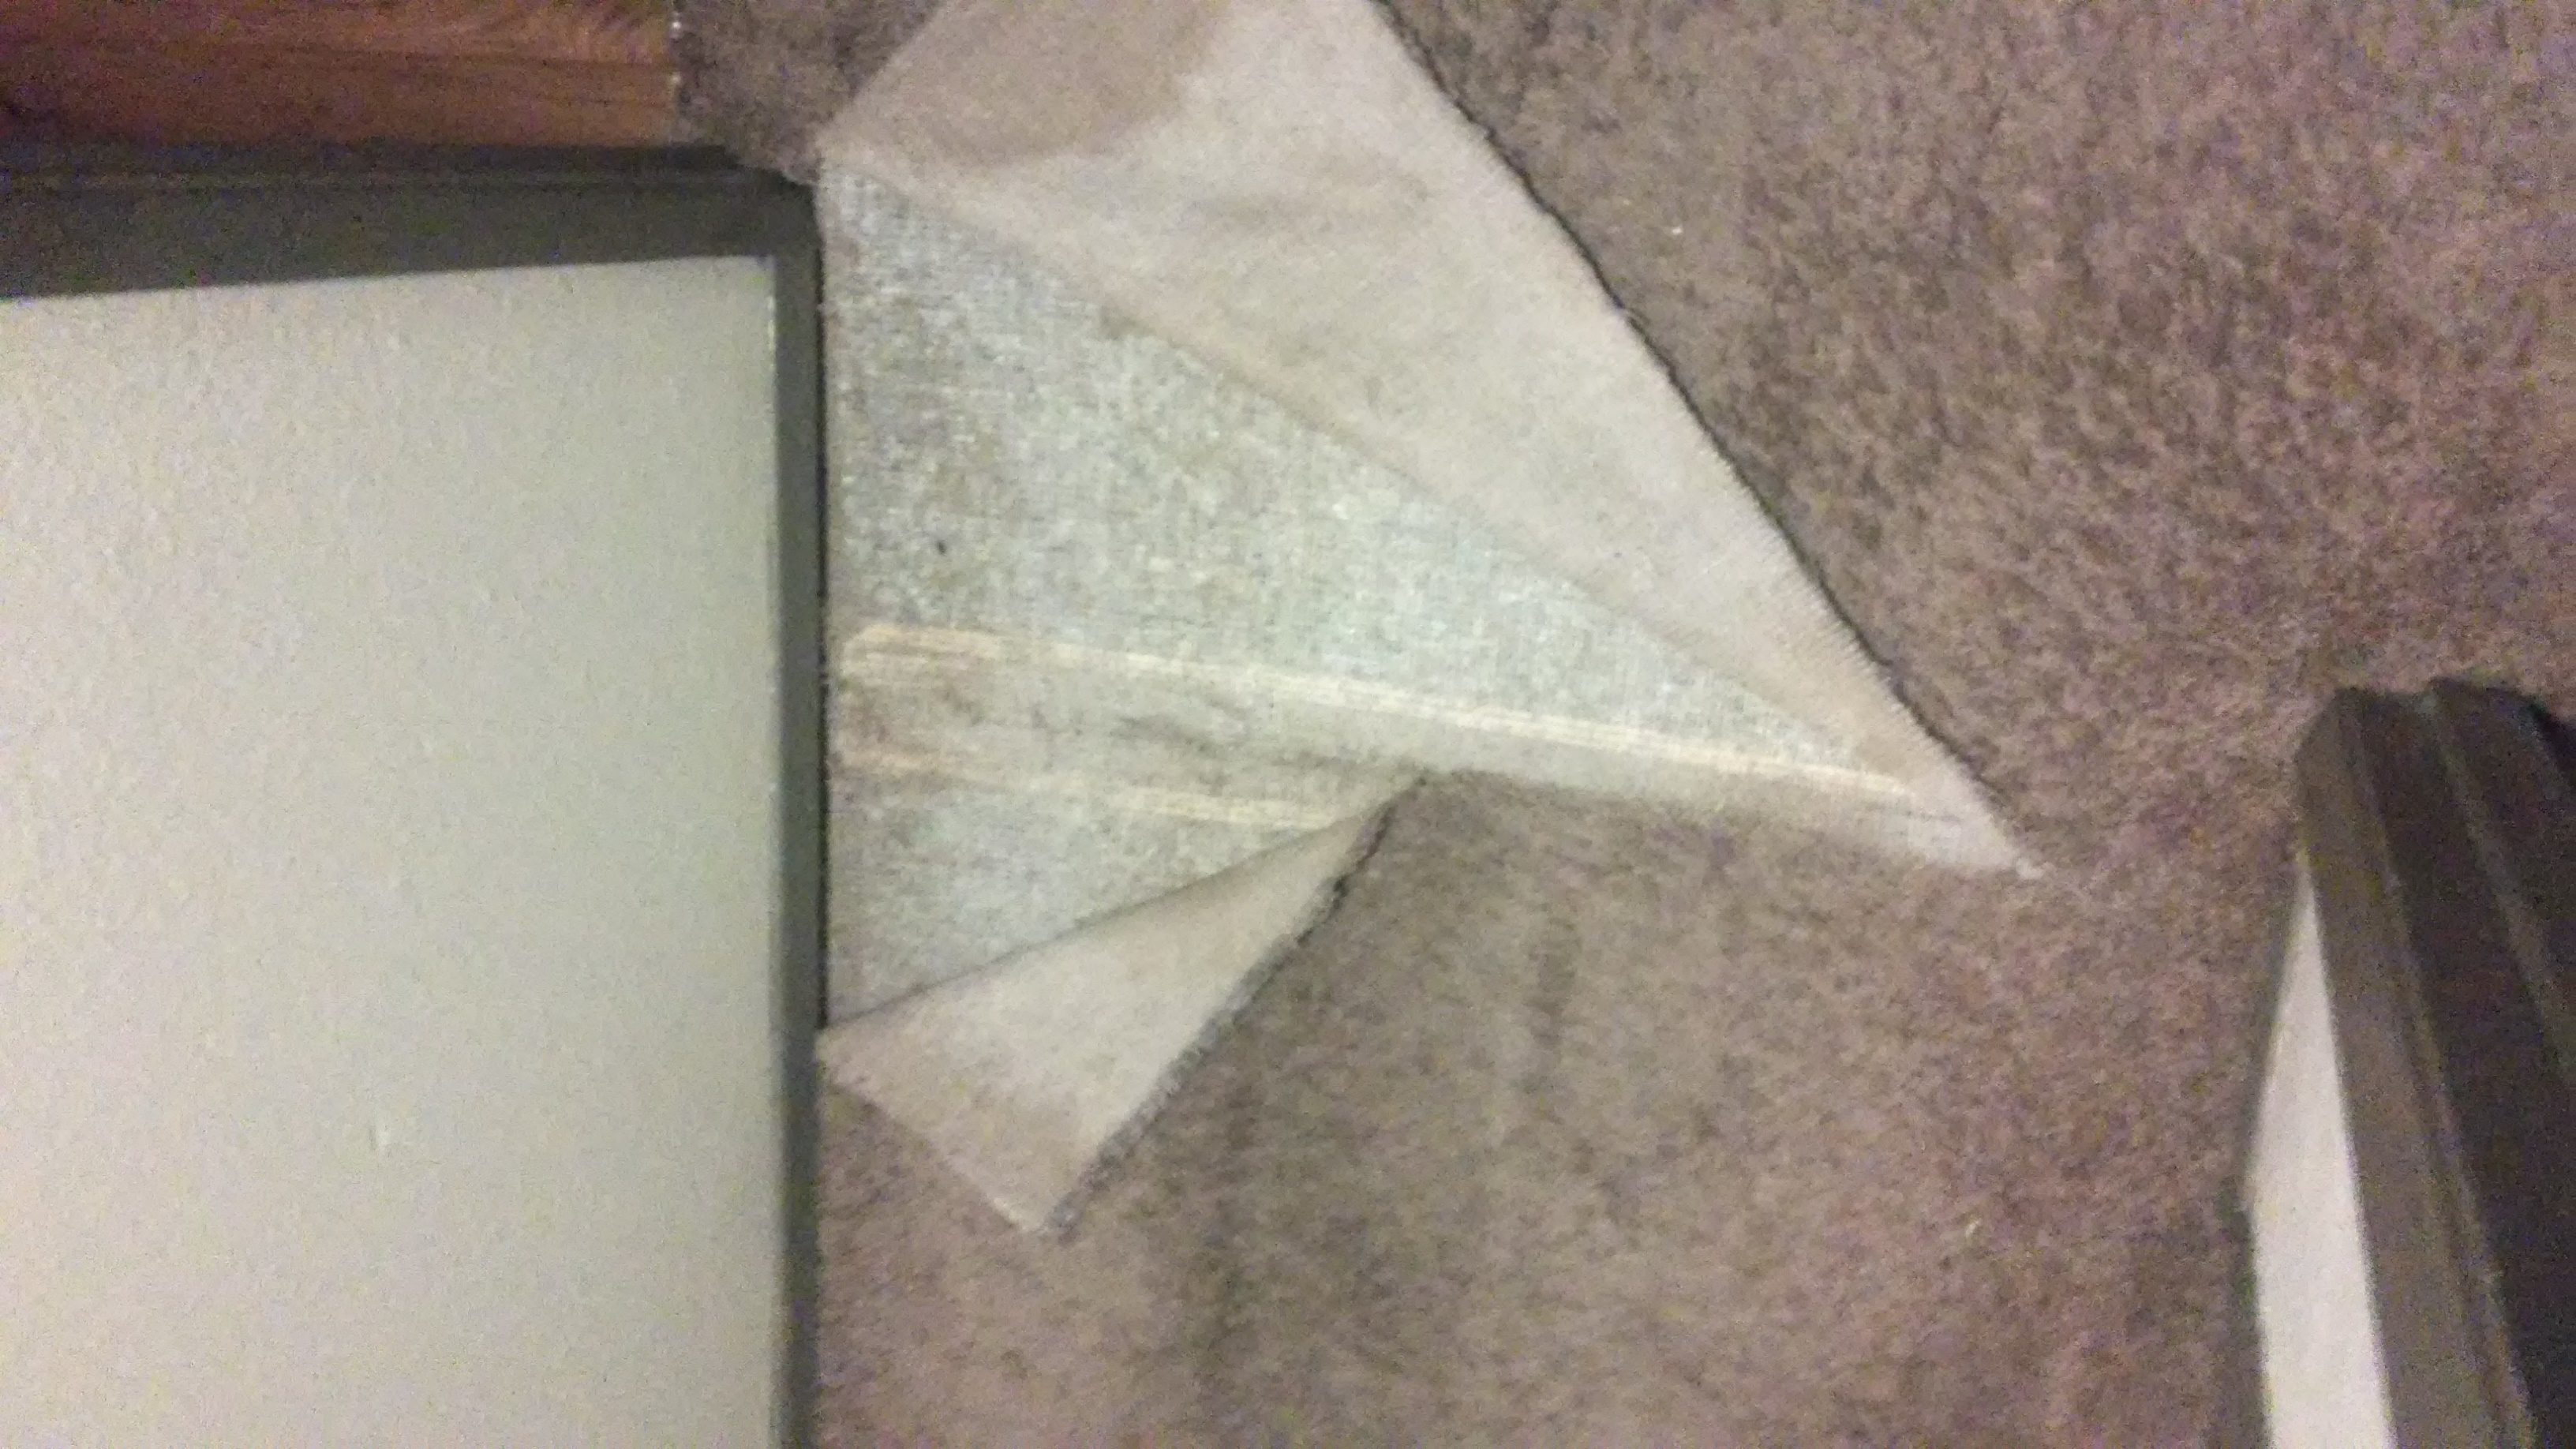 Carpet tear in hallway, untouched since move in, March 2015